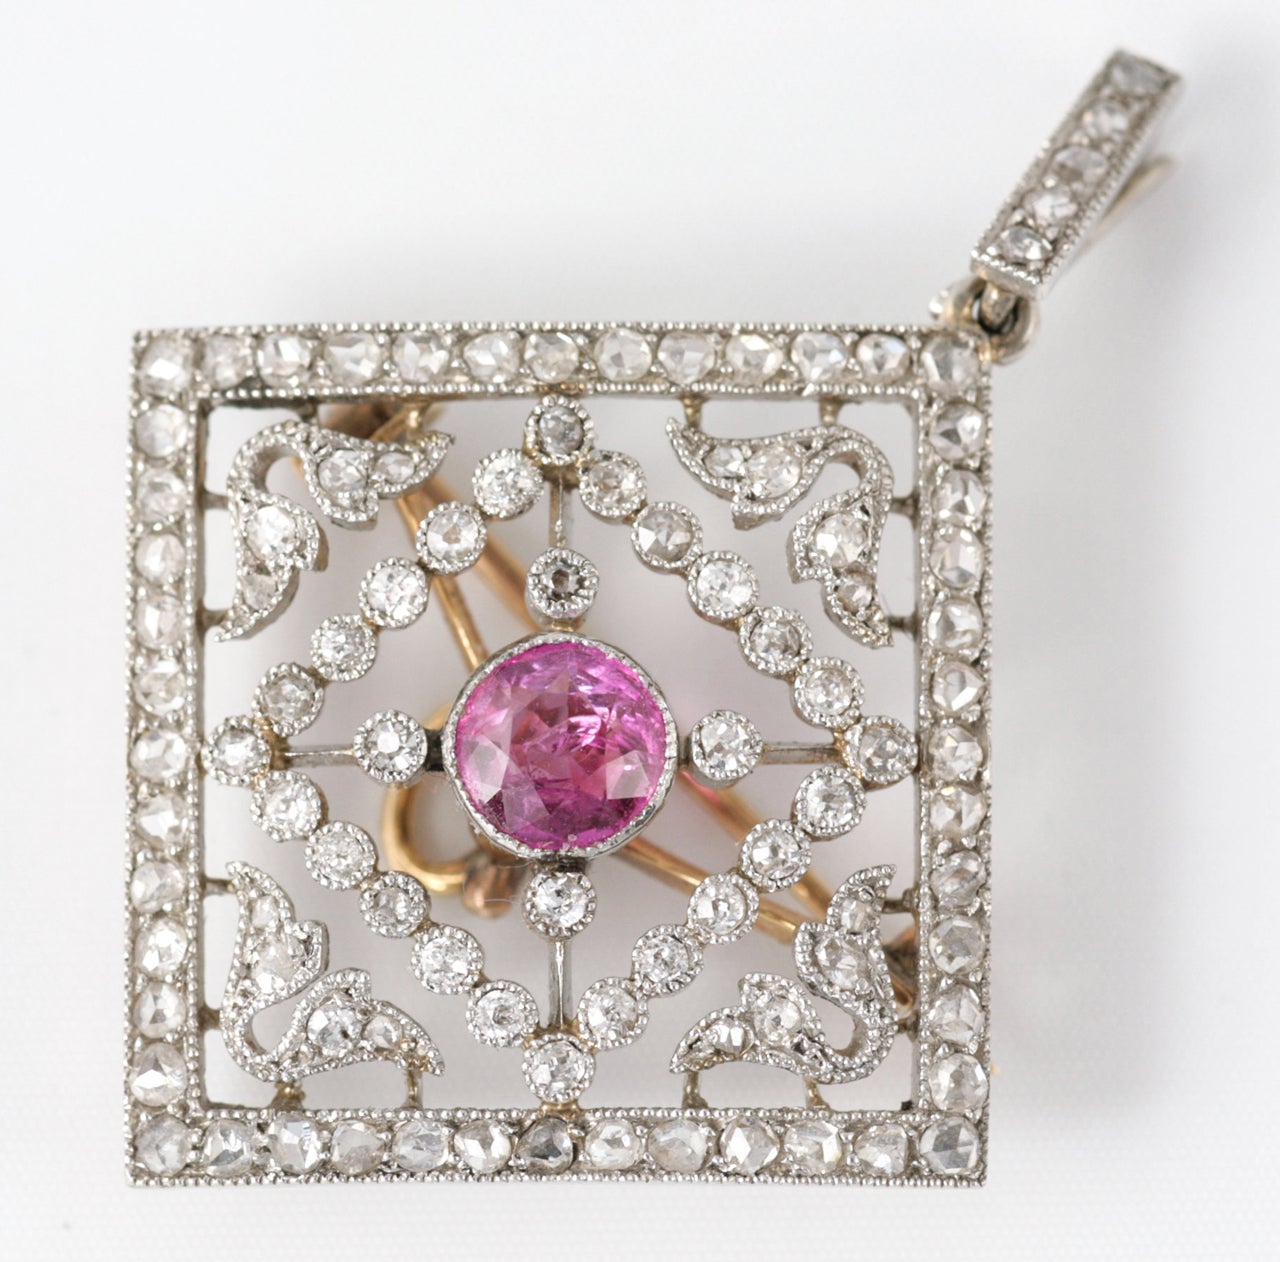 Platinum set Diamond brooch pendant with pink Sapphire centre in origianl fitted case.